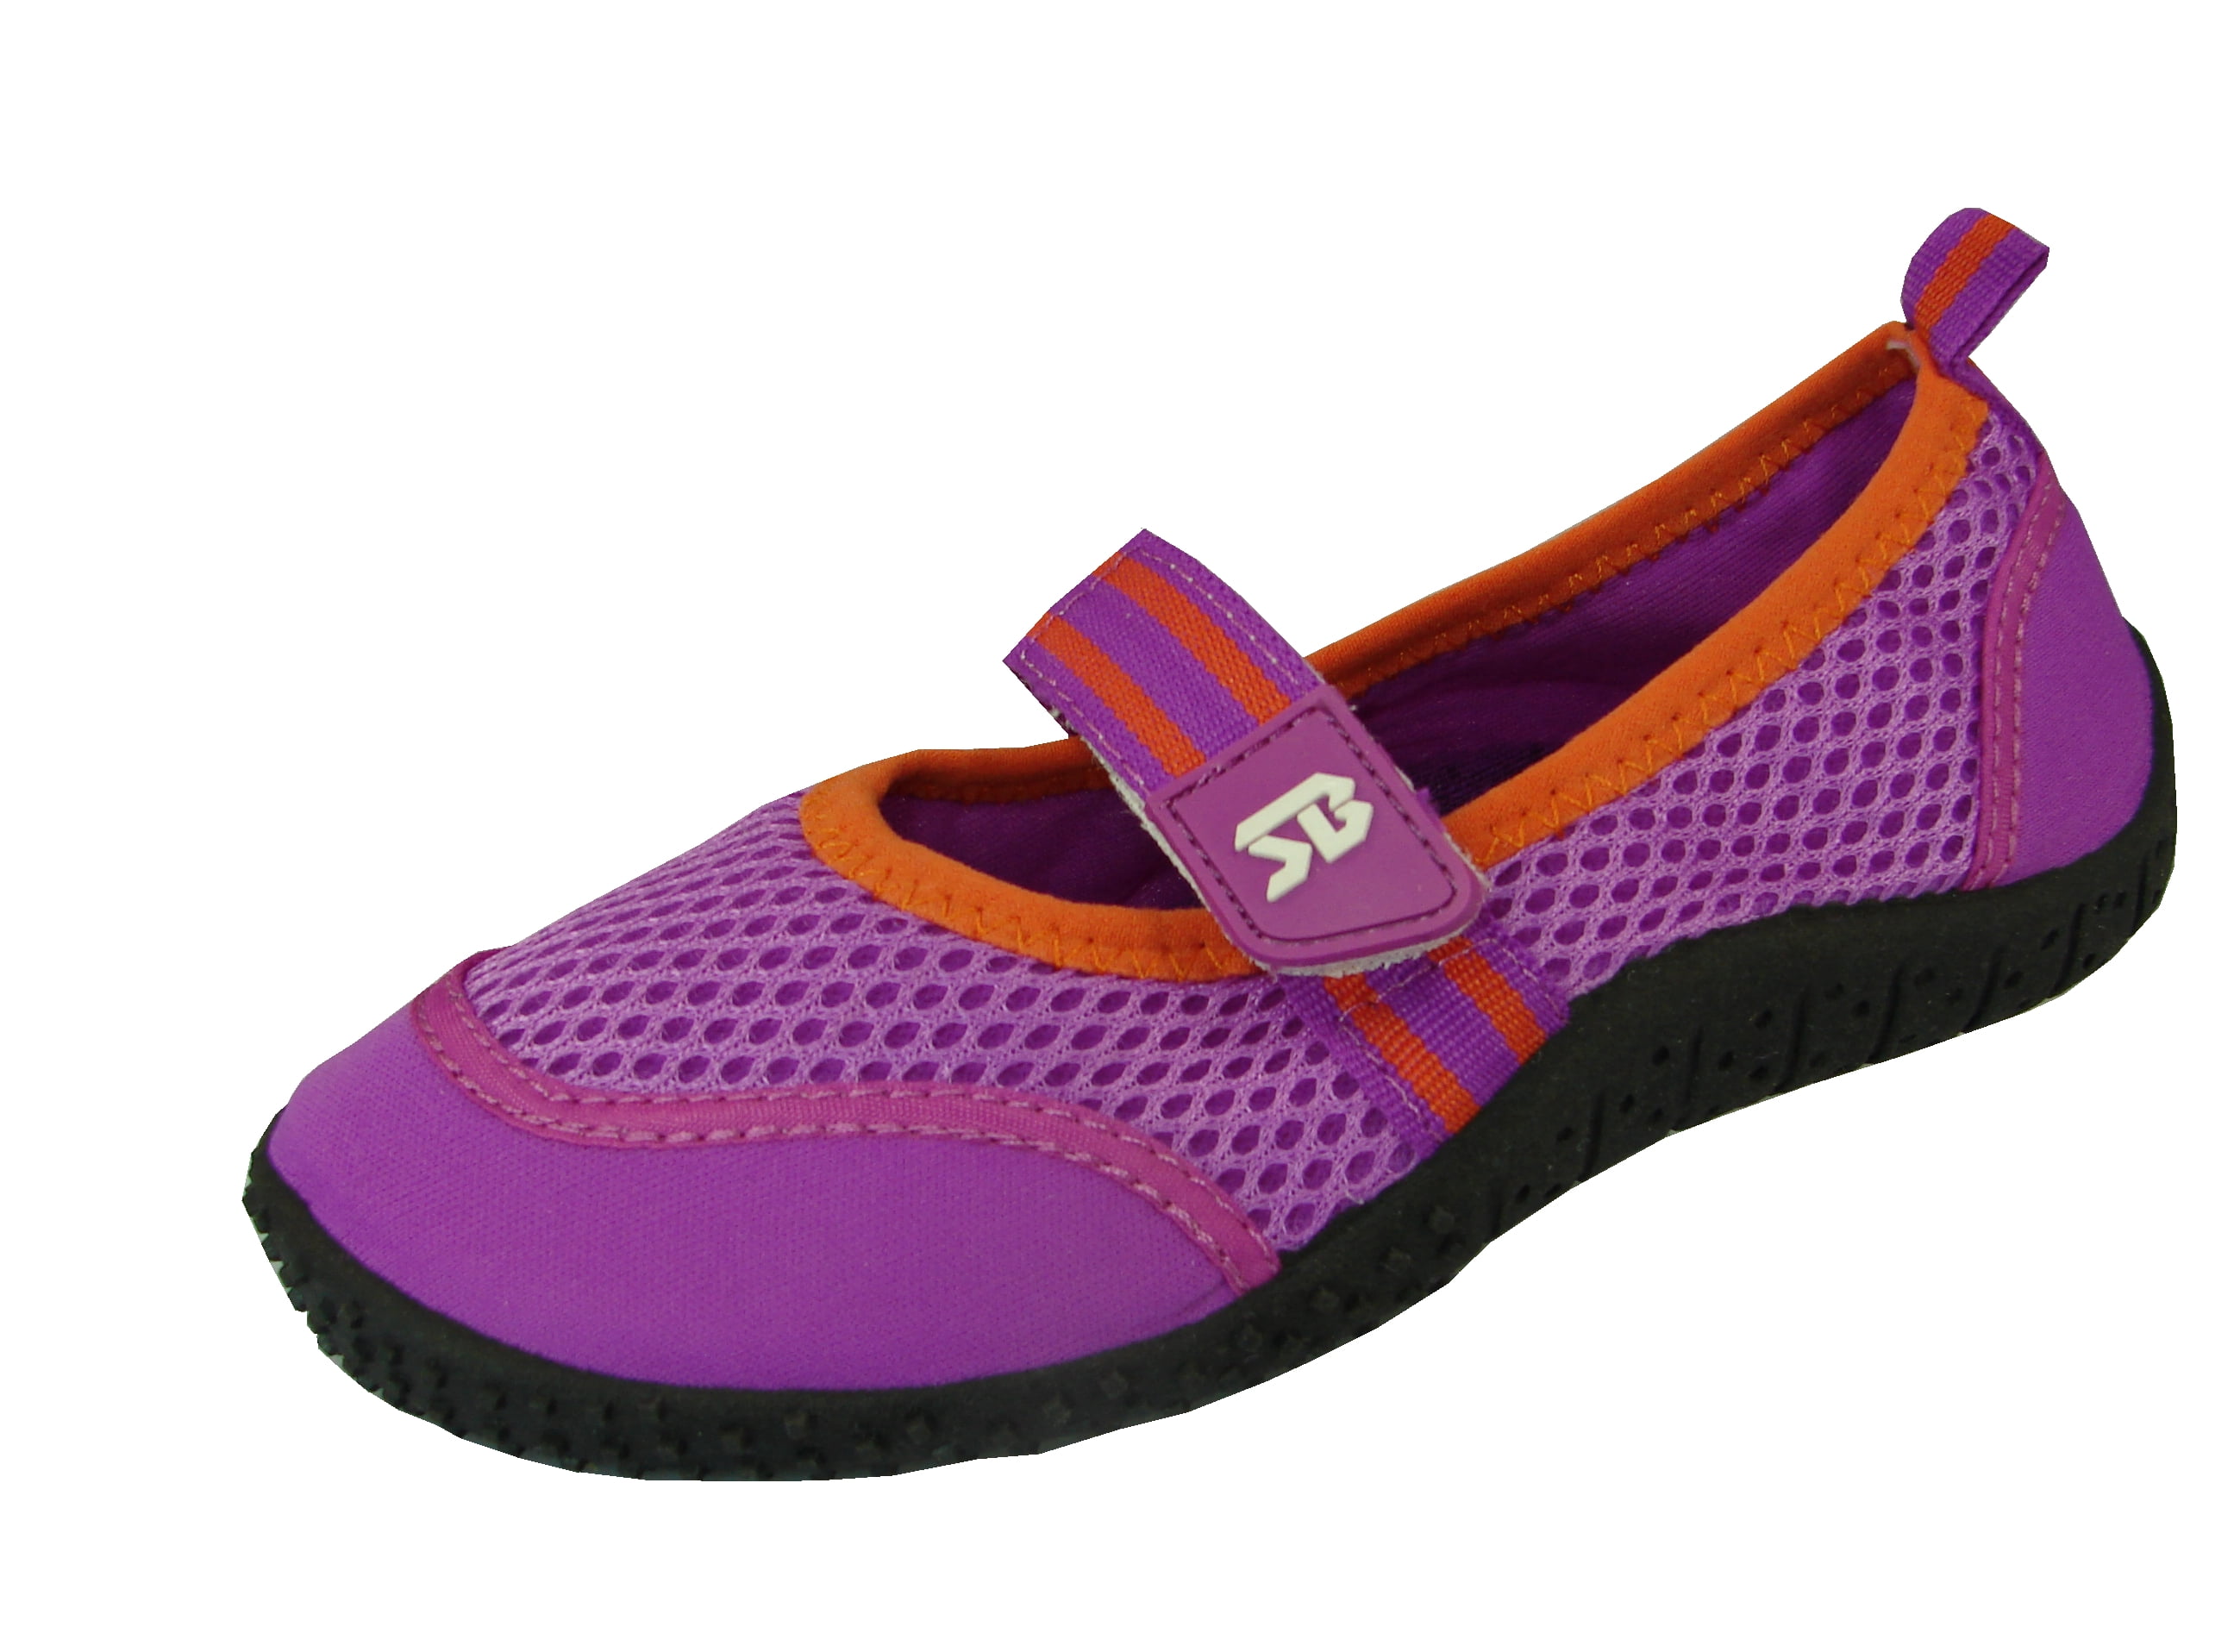 Star Bay - Starbay Kids Athletic Beach & Pool Water Shoes with ...